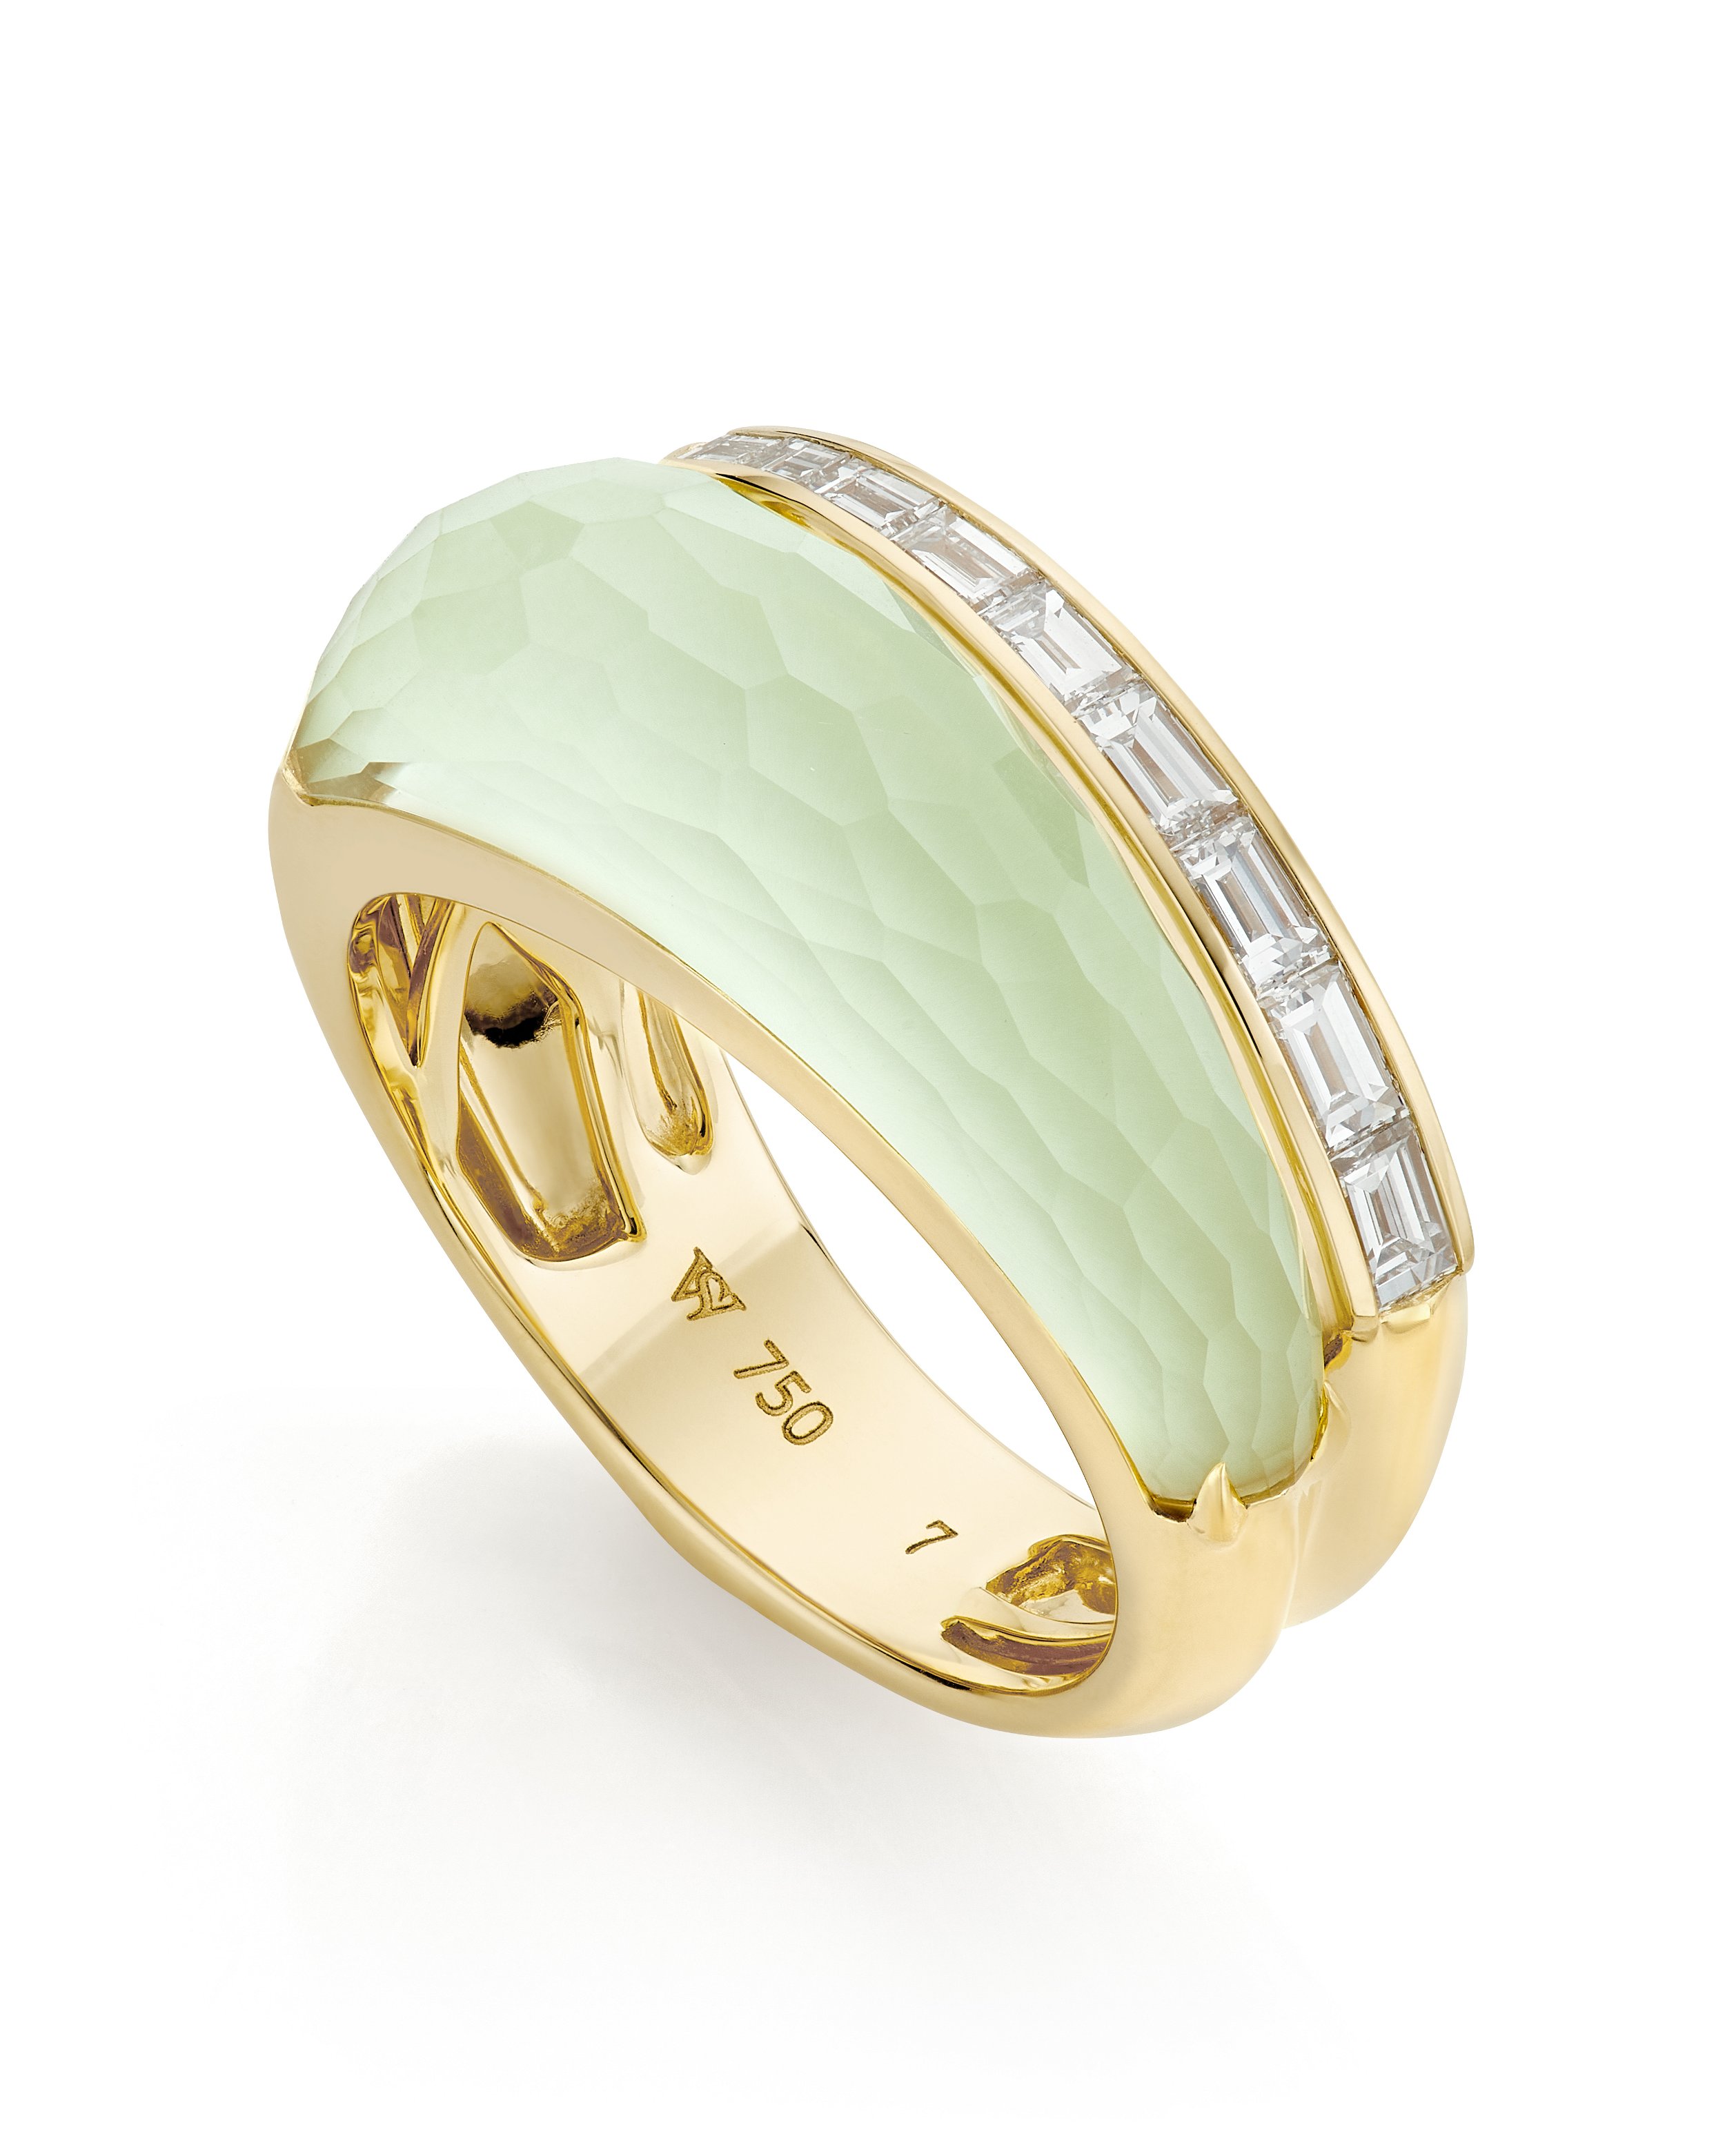 CH2 Shard Slimline Stack Ring with Chrysolemon and White Diamonds in 18kt Yellow Gold